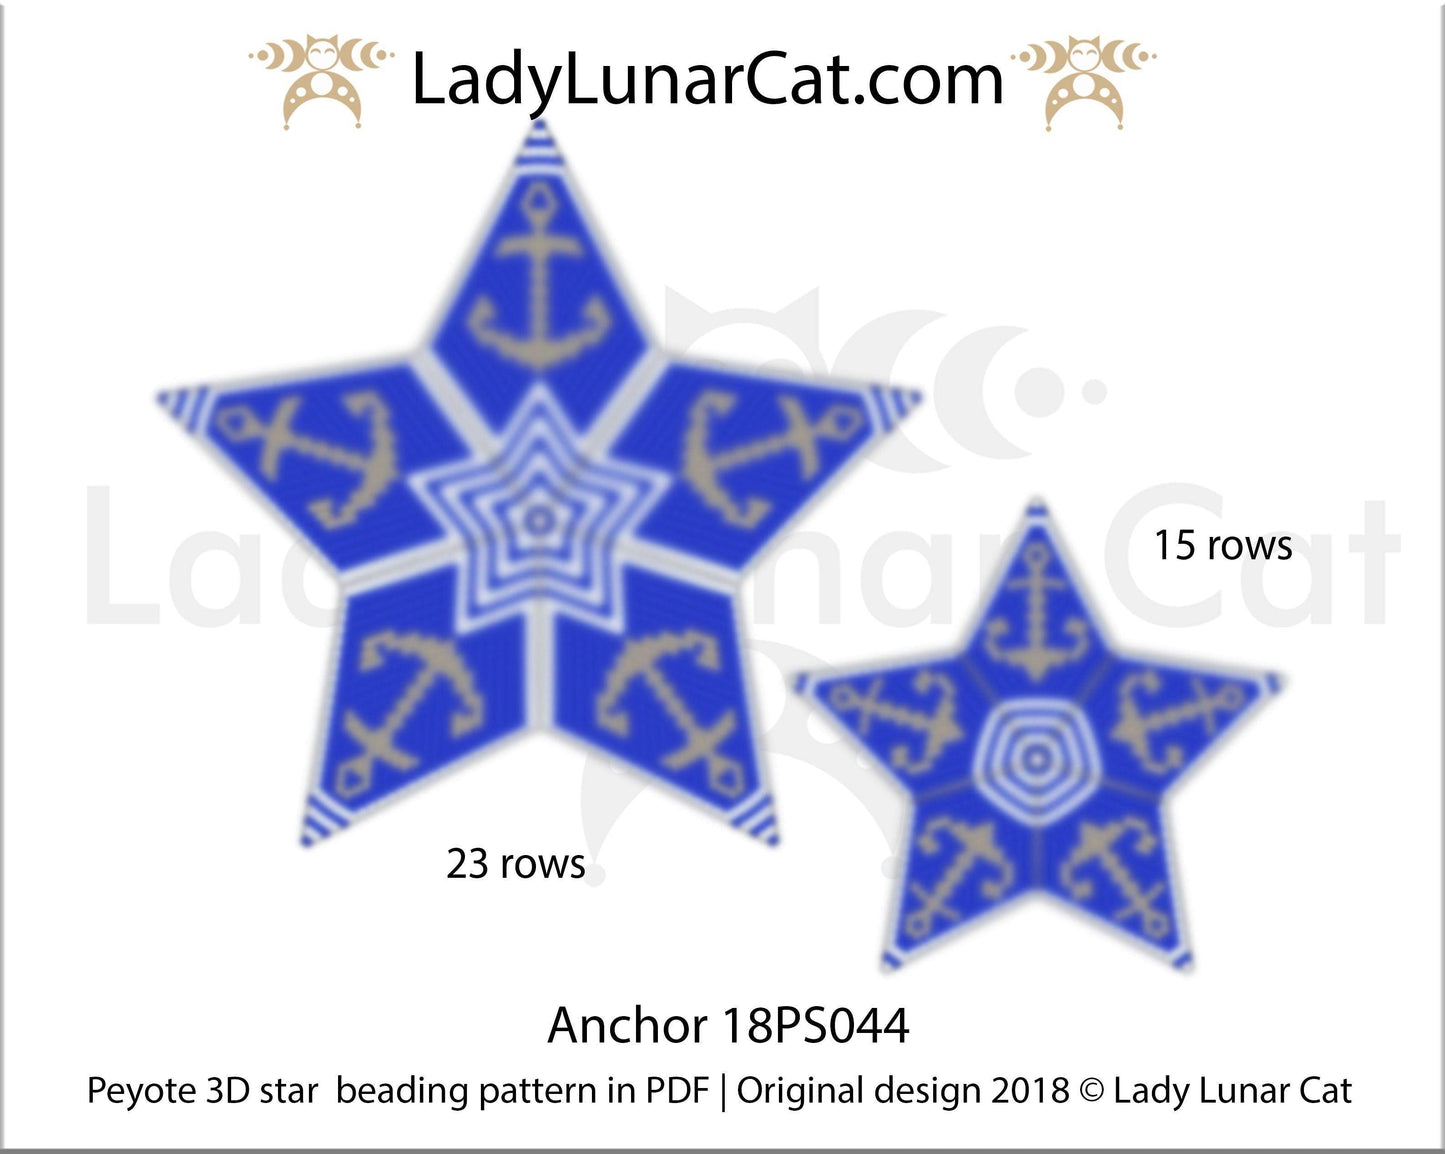 Peyote star patterns for beading Anchor 18PS044 LadyLunarCat